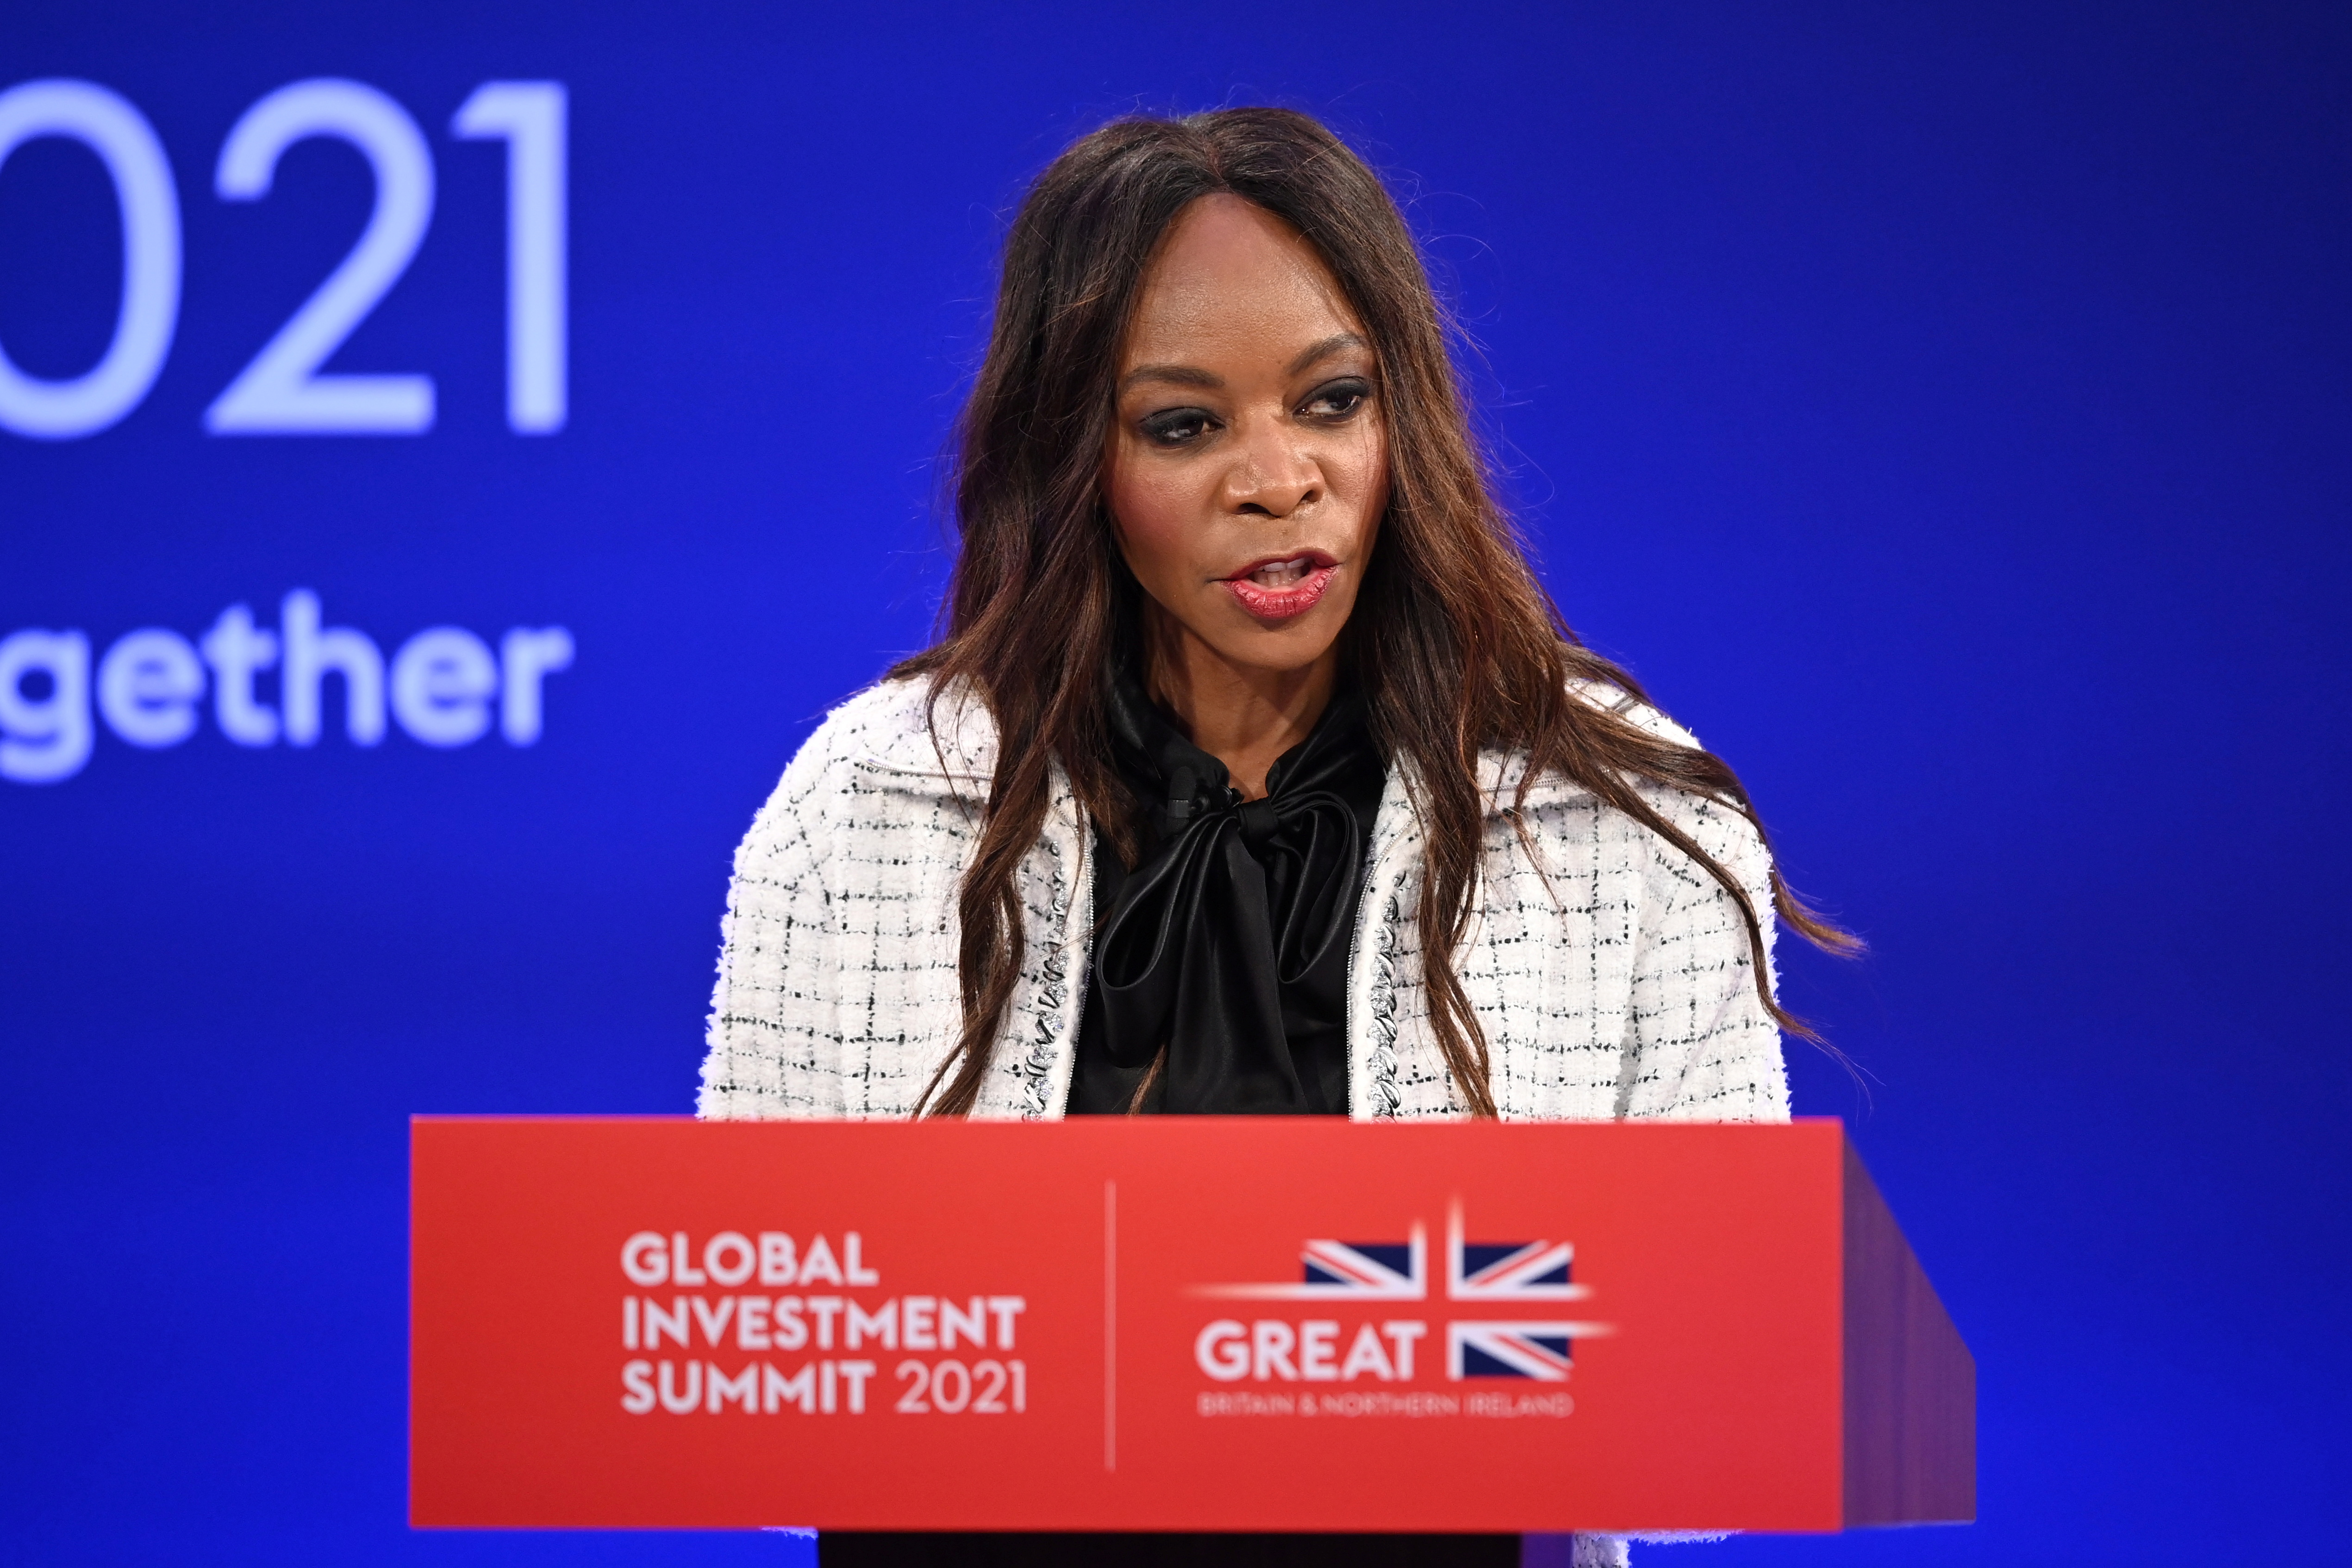 Economist Dambisa Moyo speaks during the Global Investment Summit at the Science Museum, in London, Britain, October 19, 2021. Leon Neal/Pool via REUTERS